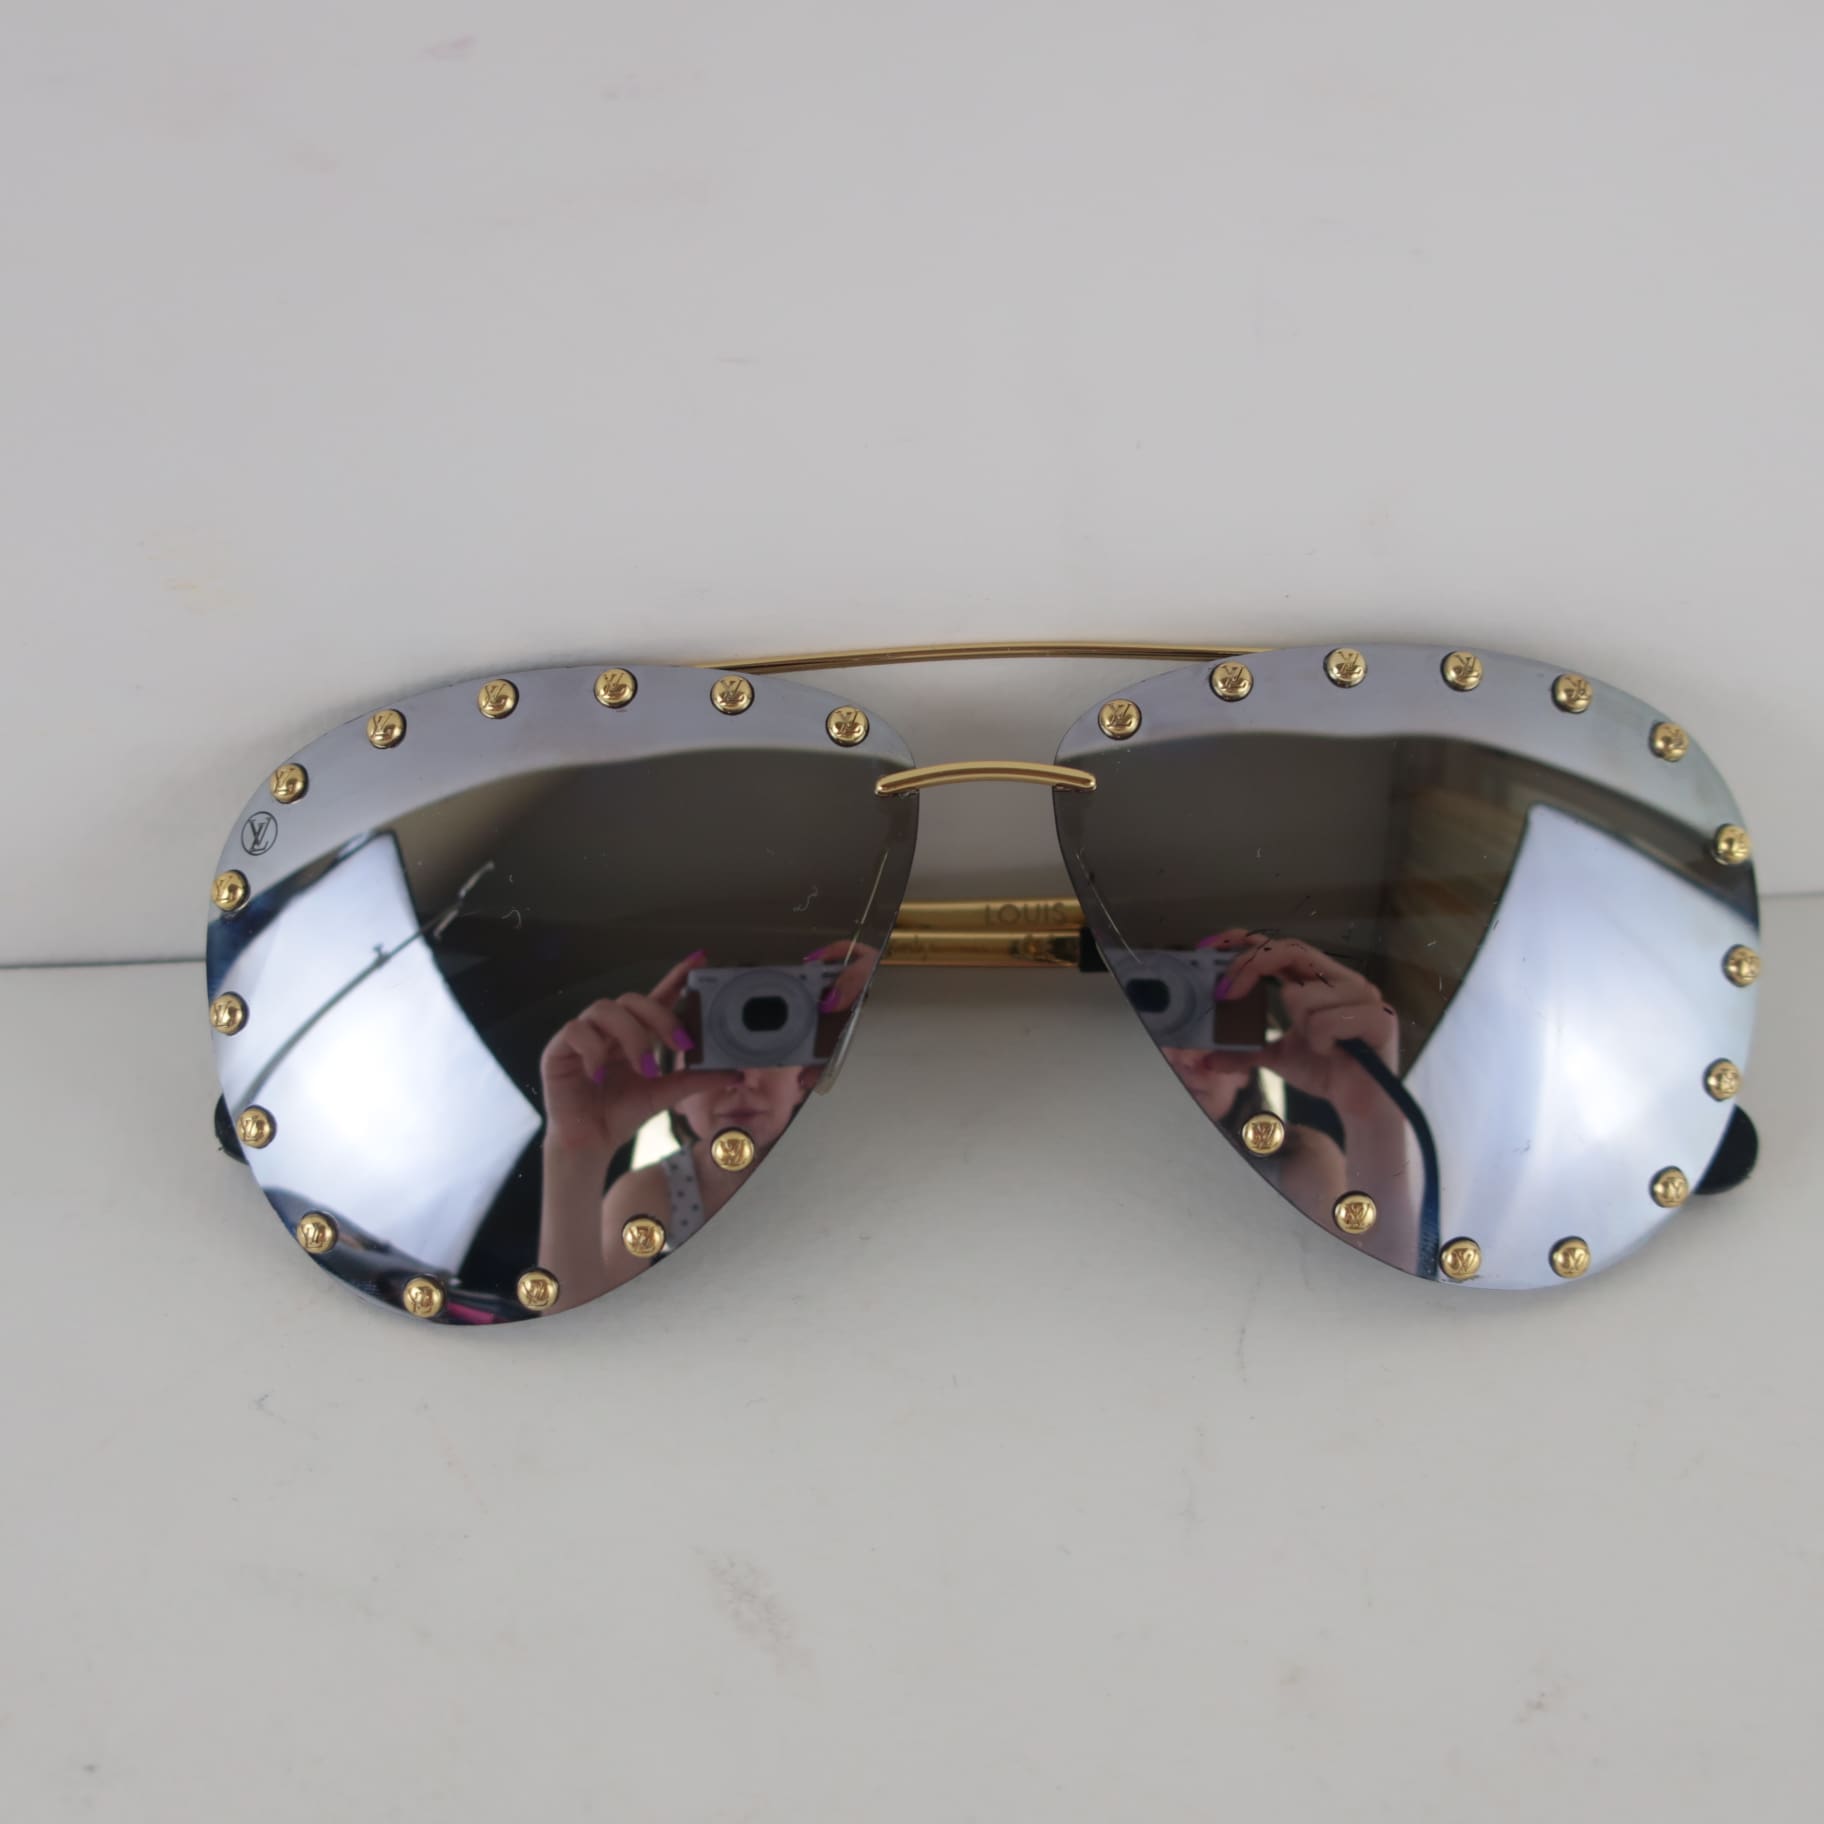 LV THE PARTY SUNGLASSES